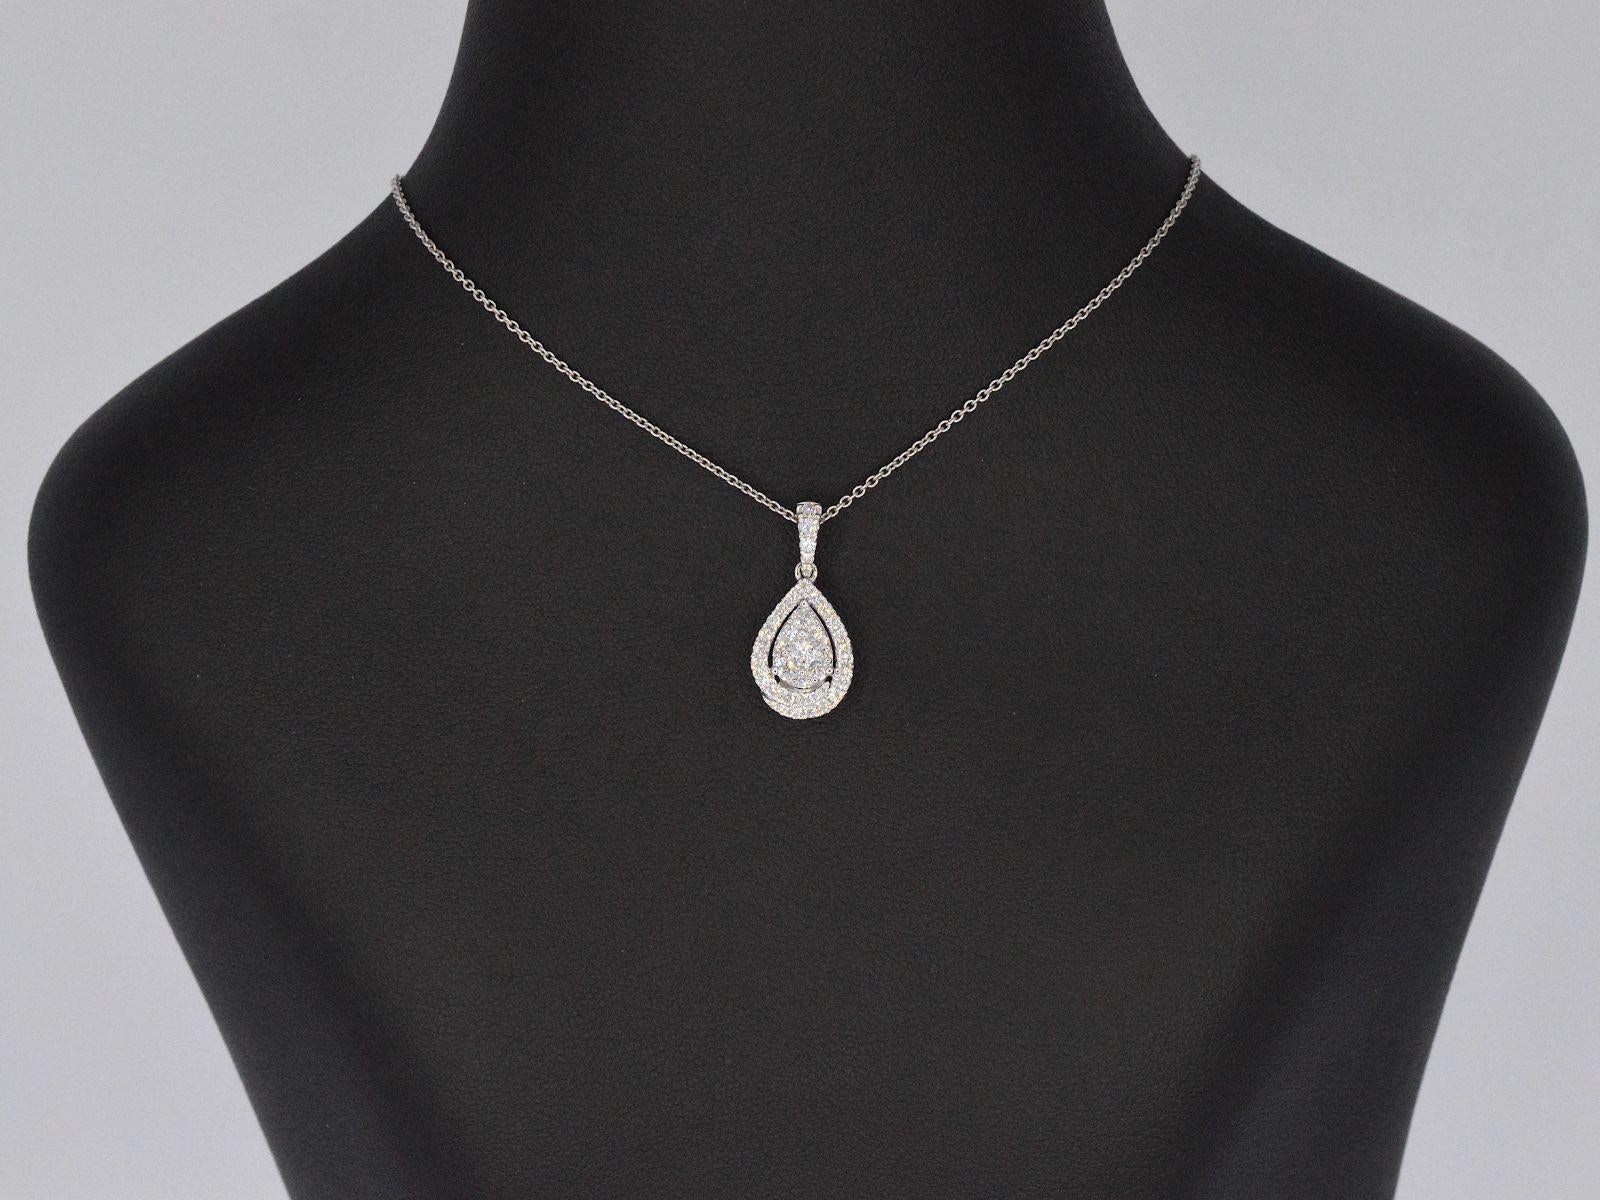 Introducing a beautiful pendant featuring naturally shiny diamonds with a total weight of 0.75 carat. These diamonds are brilliant-cut, offering excellent sparkle and shine. With a color grading of F-G and a purity of VS, these diamonds reflect